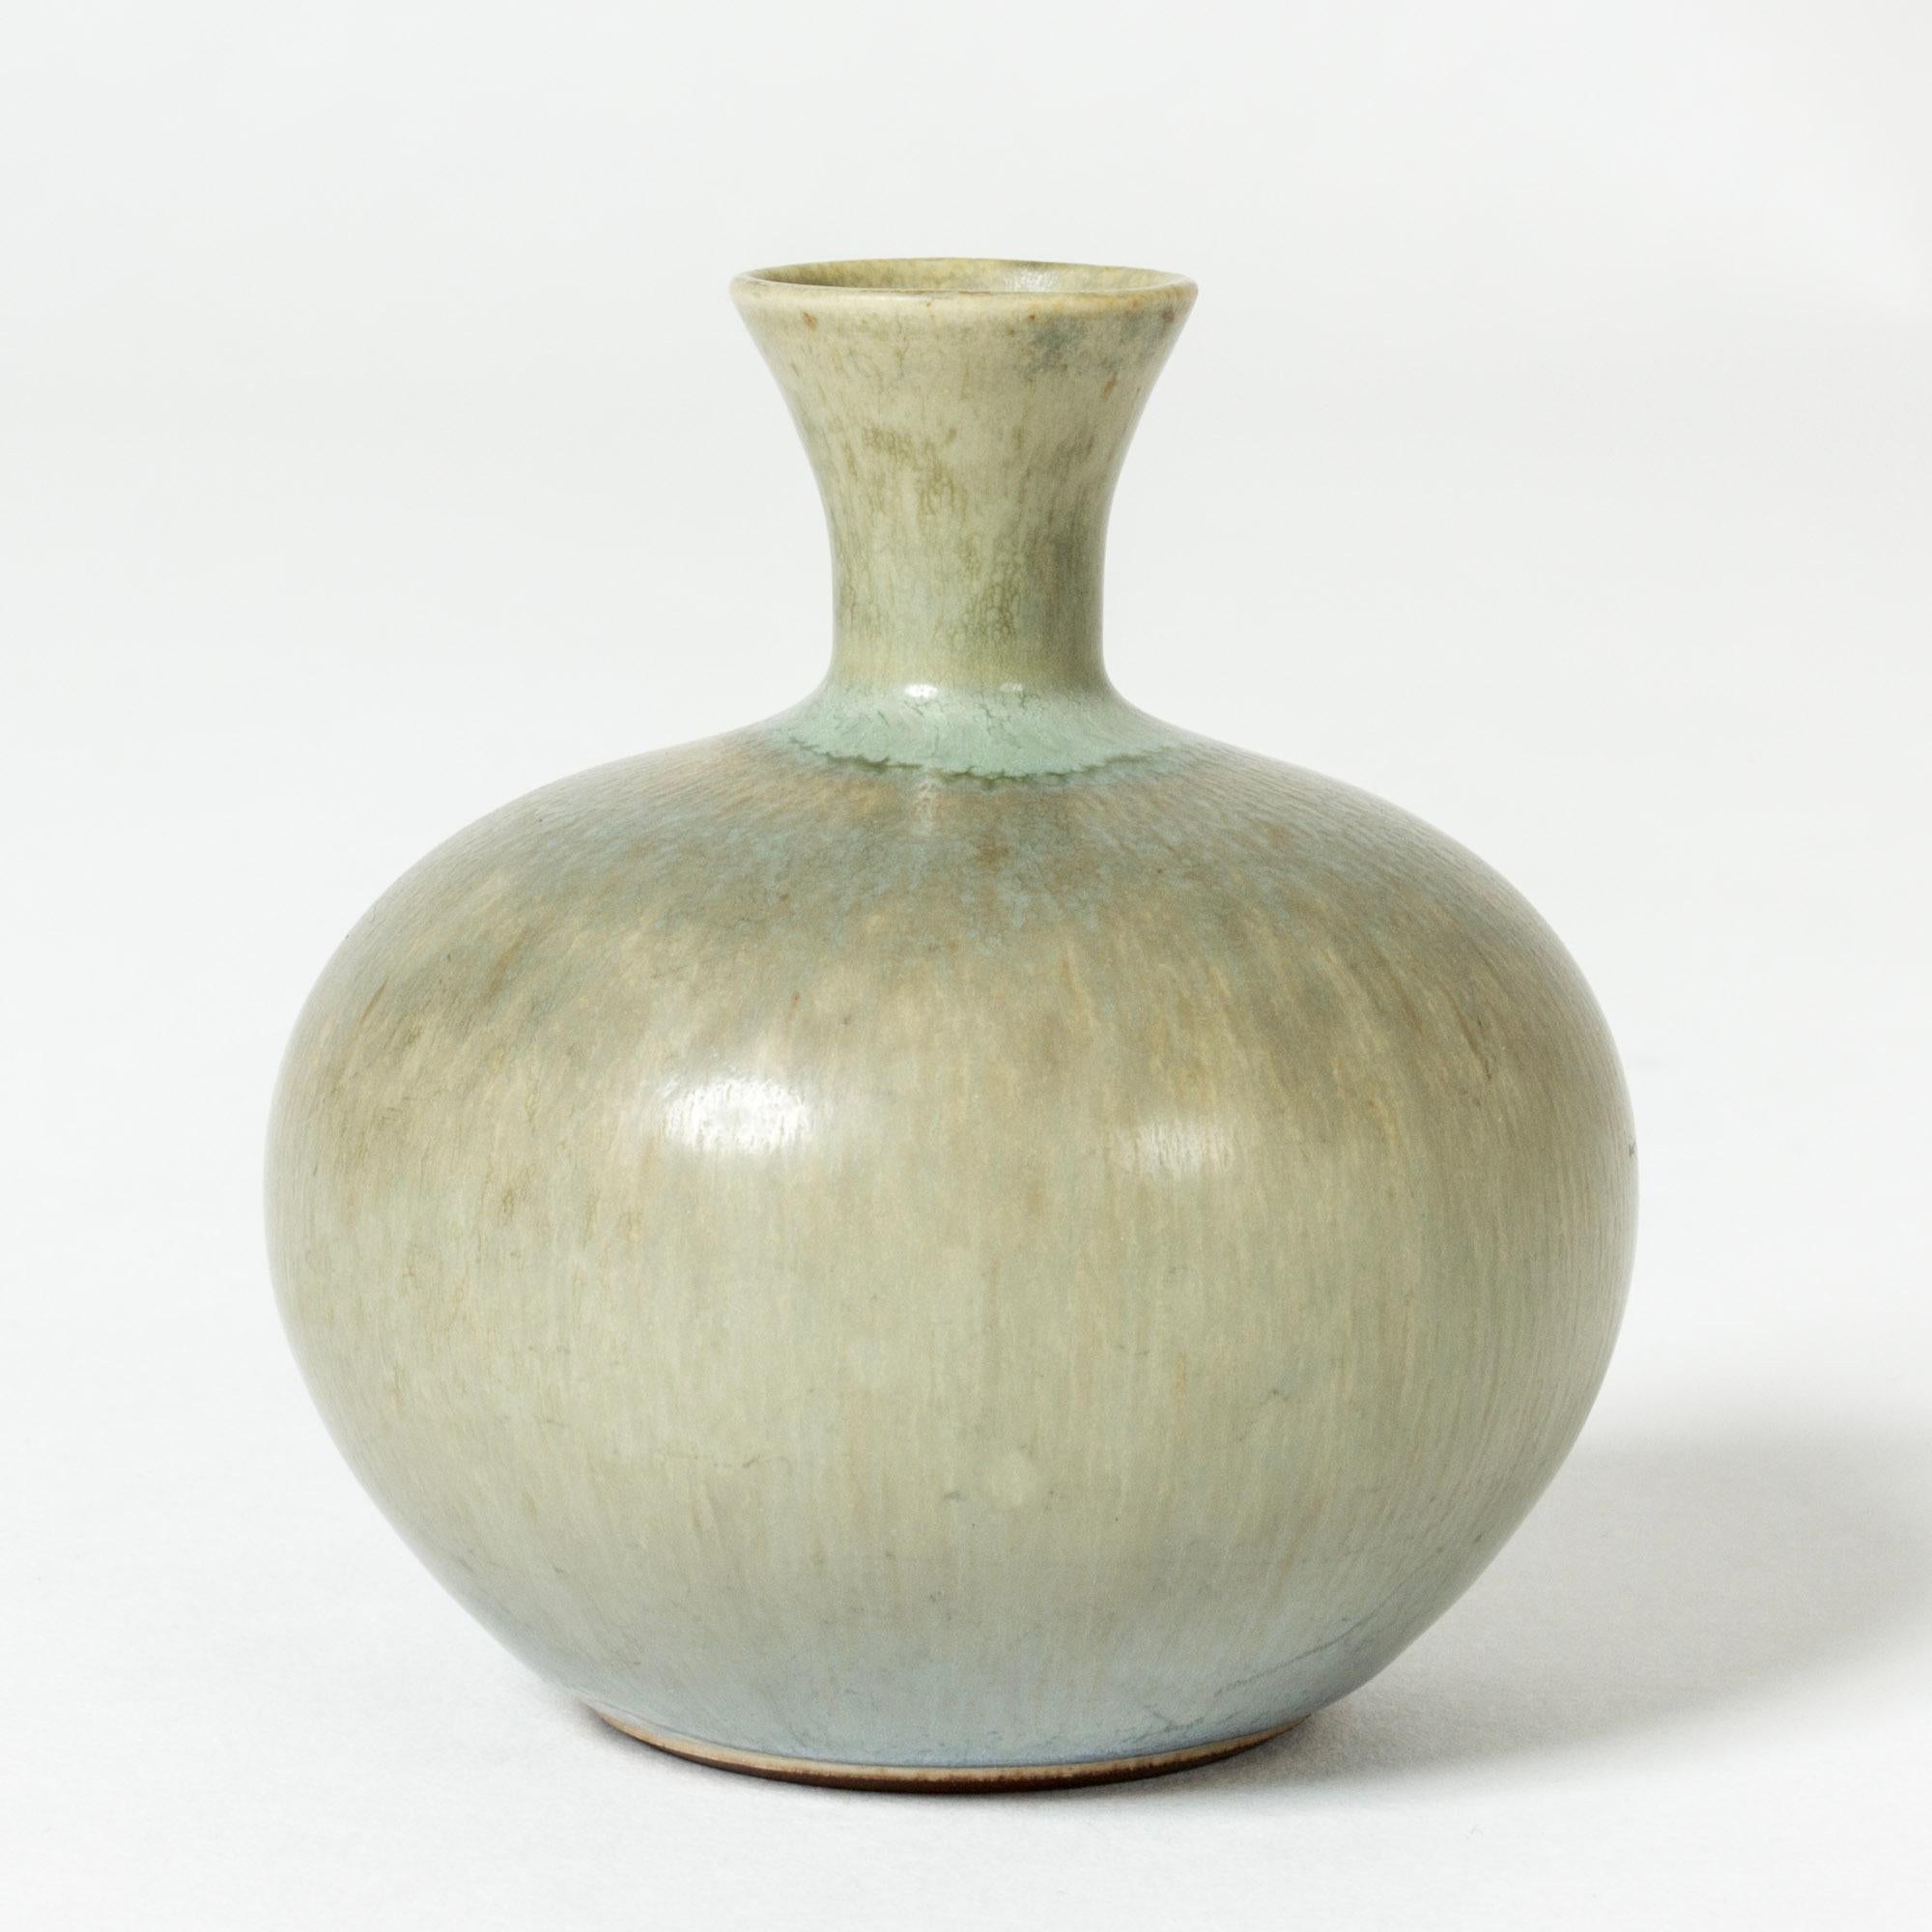 Small stoneware vase by Berndt Friberg, in a soft plump form with appealing celadon green hare’s fur glaze.

Berndt Friberg was a Swedish ceramicist, renowned for his stoneware vases and vessels for Gustavsberg. His pure, composed designs with